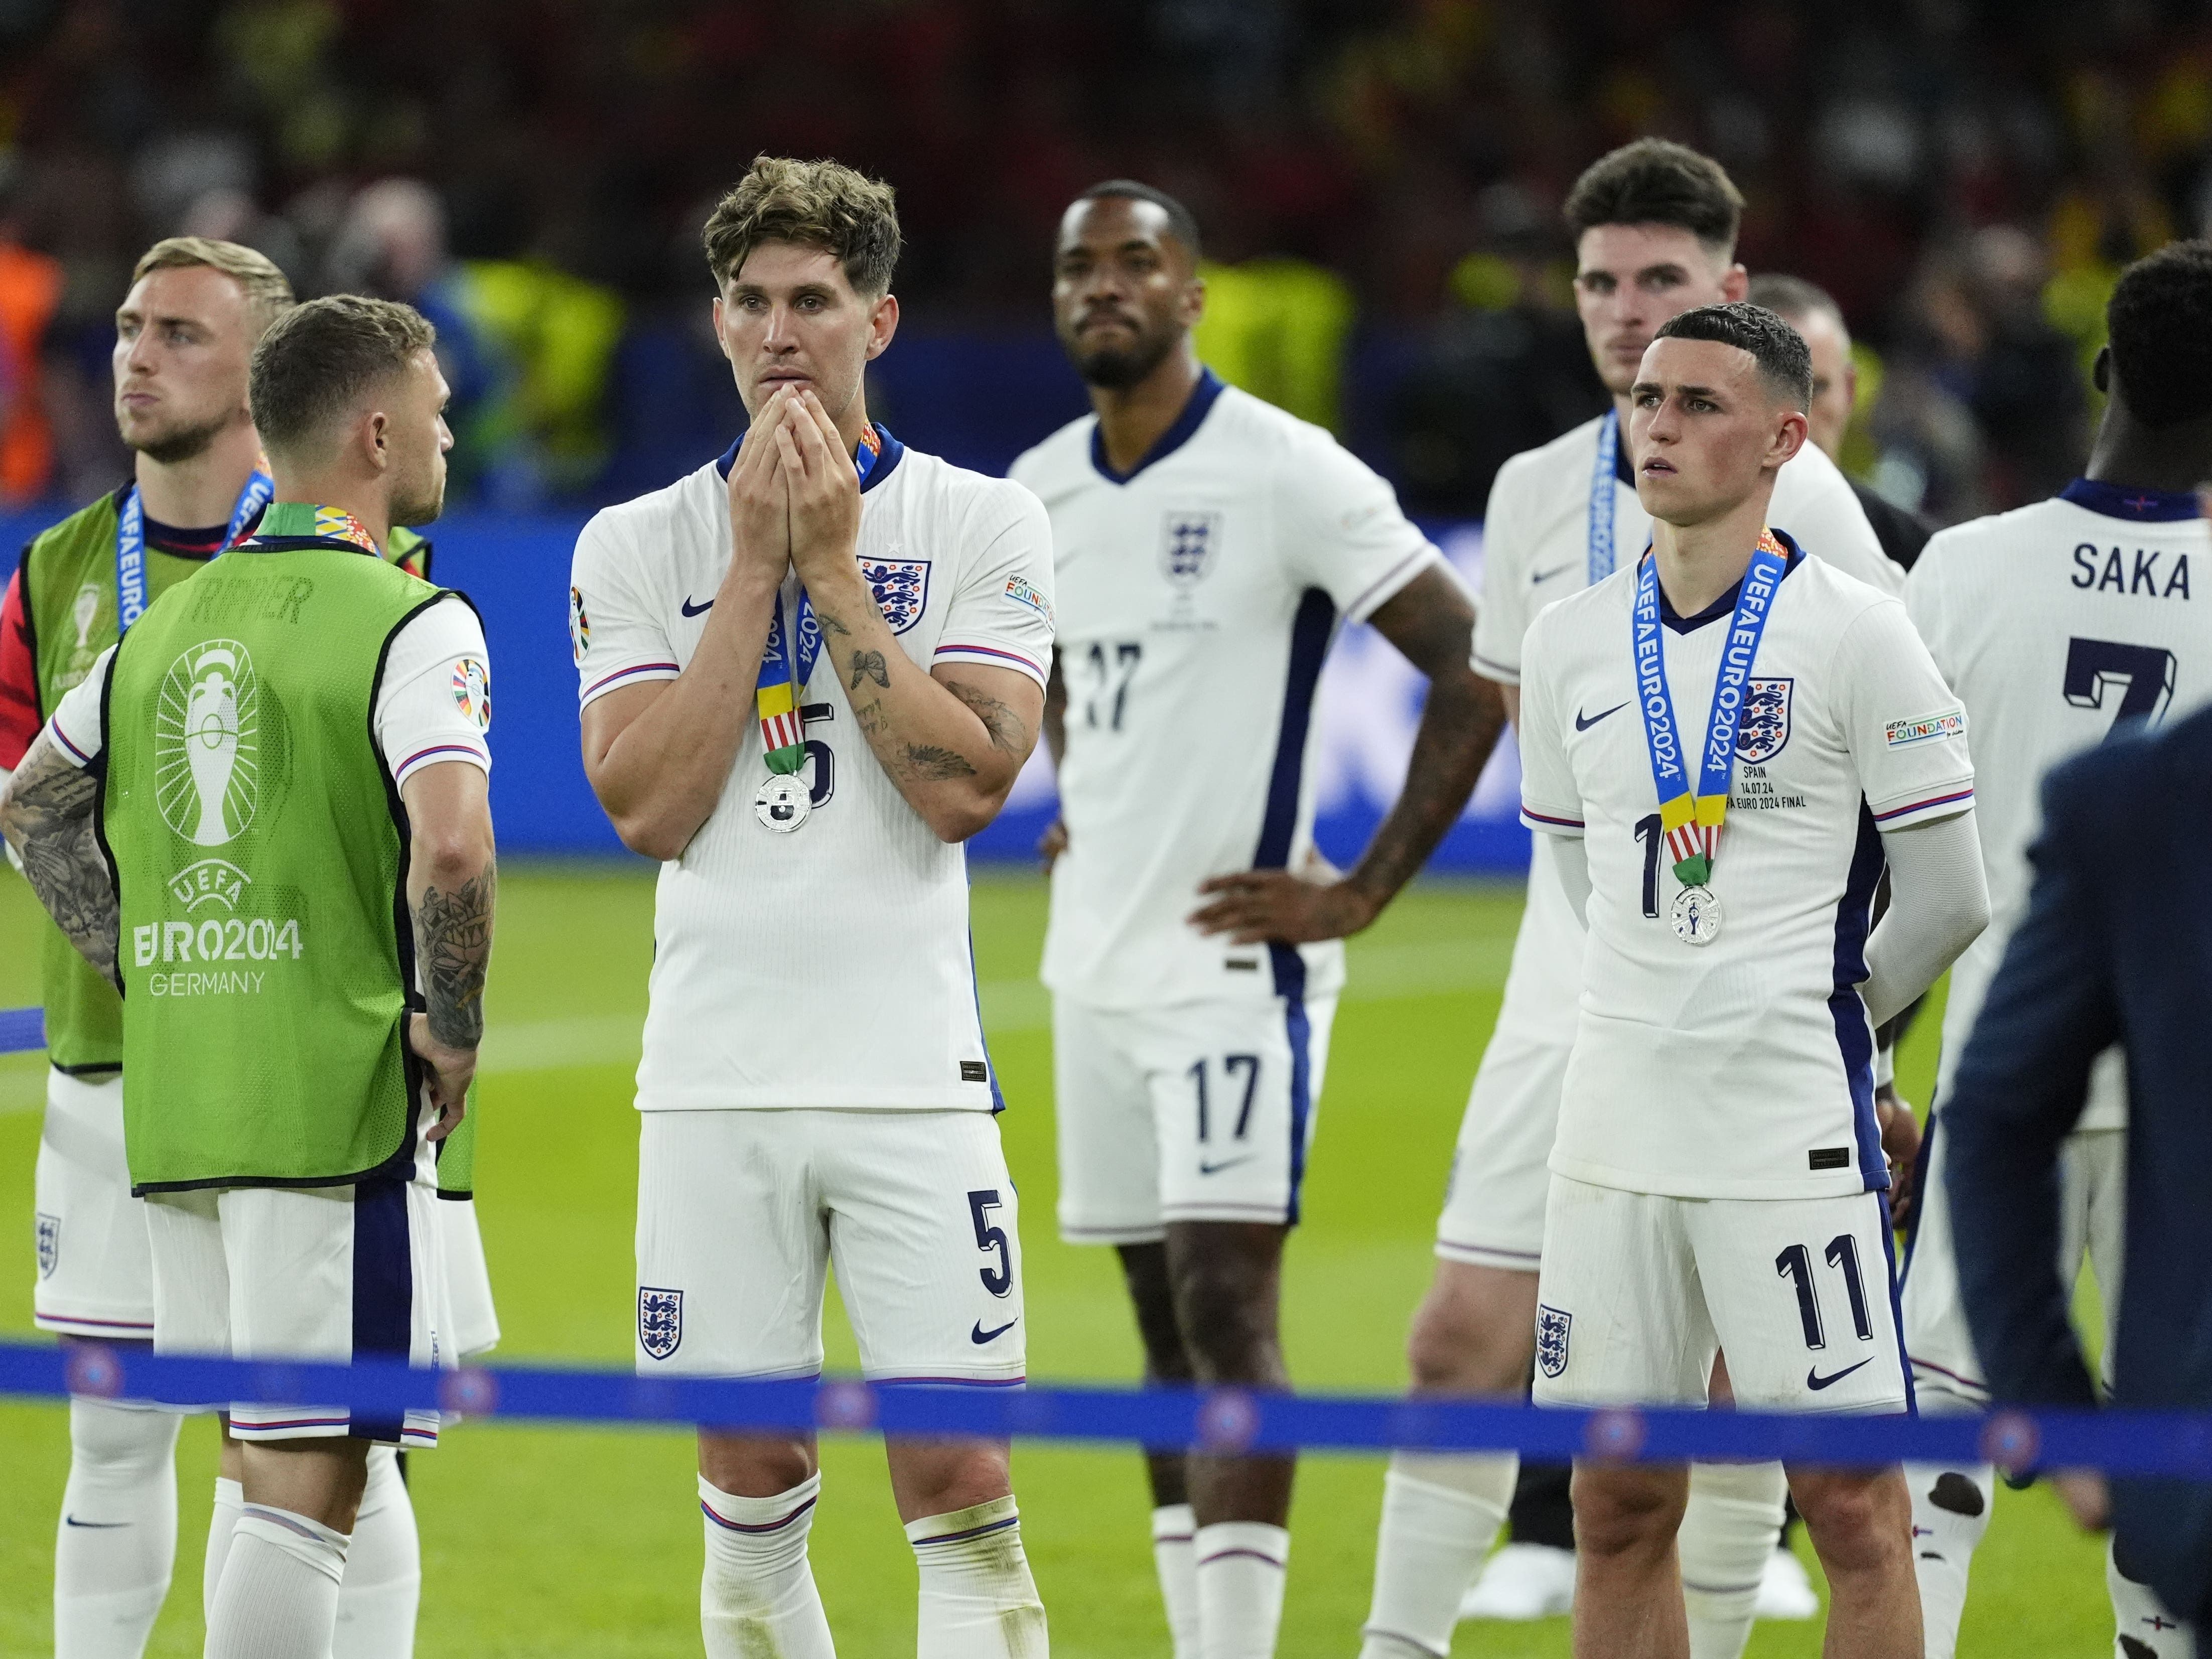 England’s success set to continue as clubs invest in youth – sports scientist